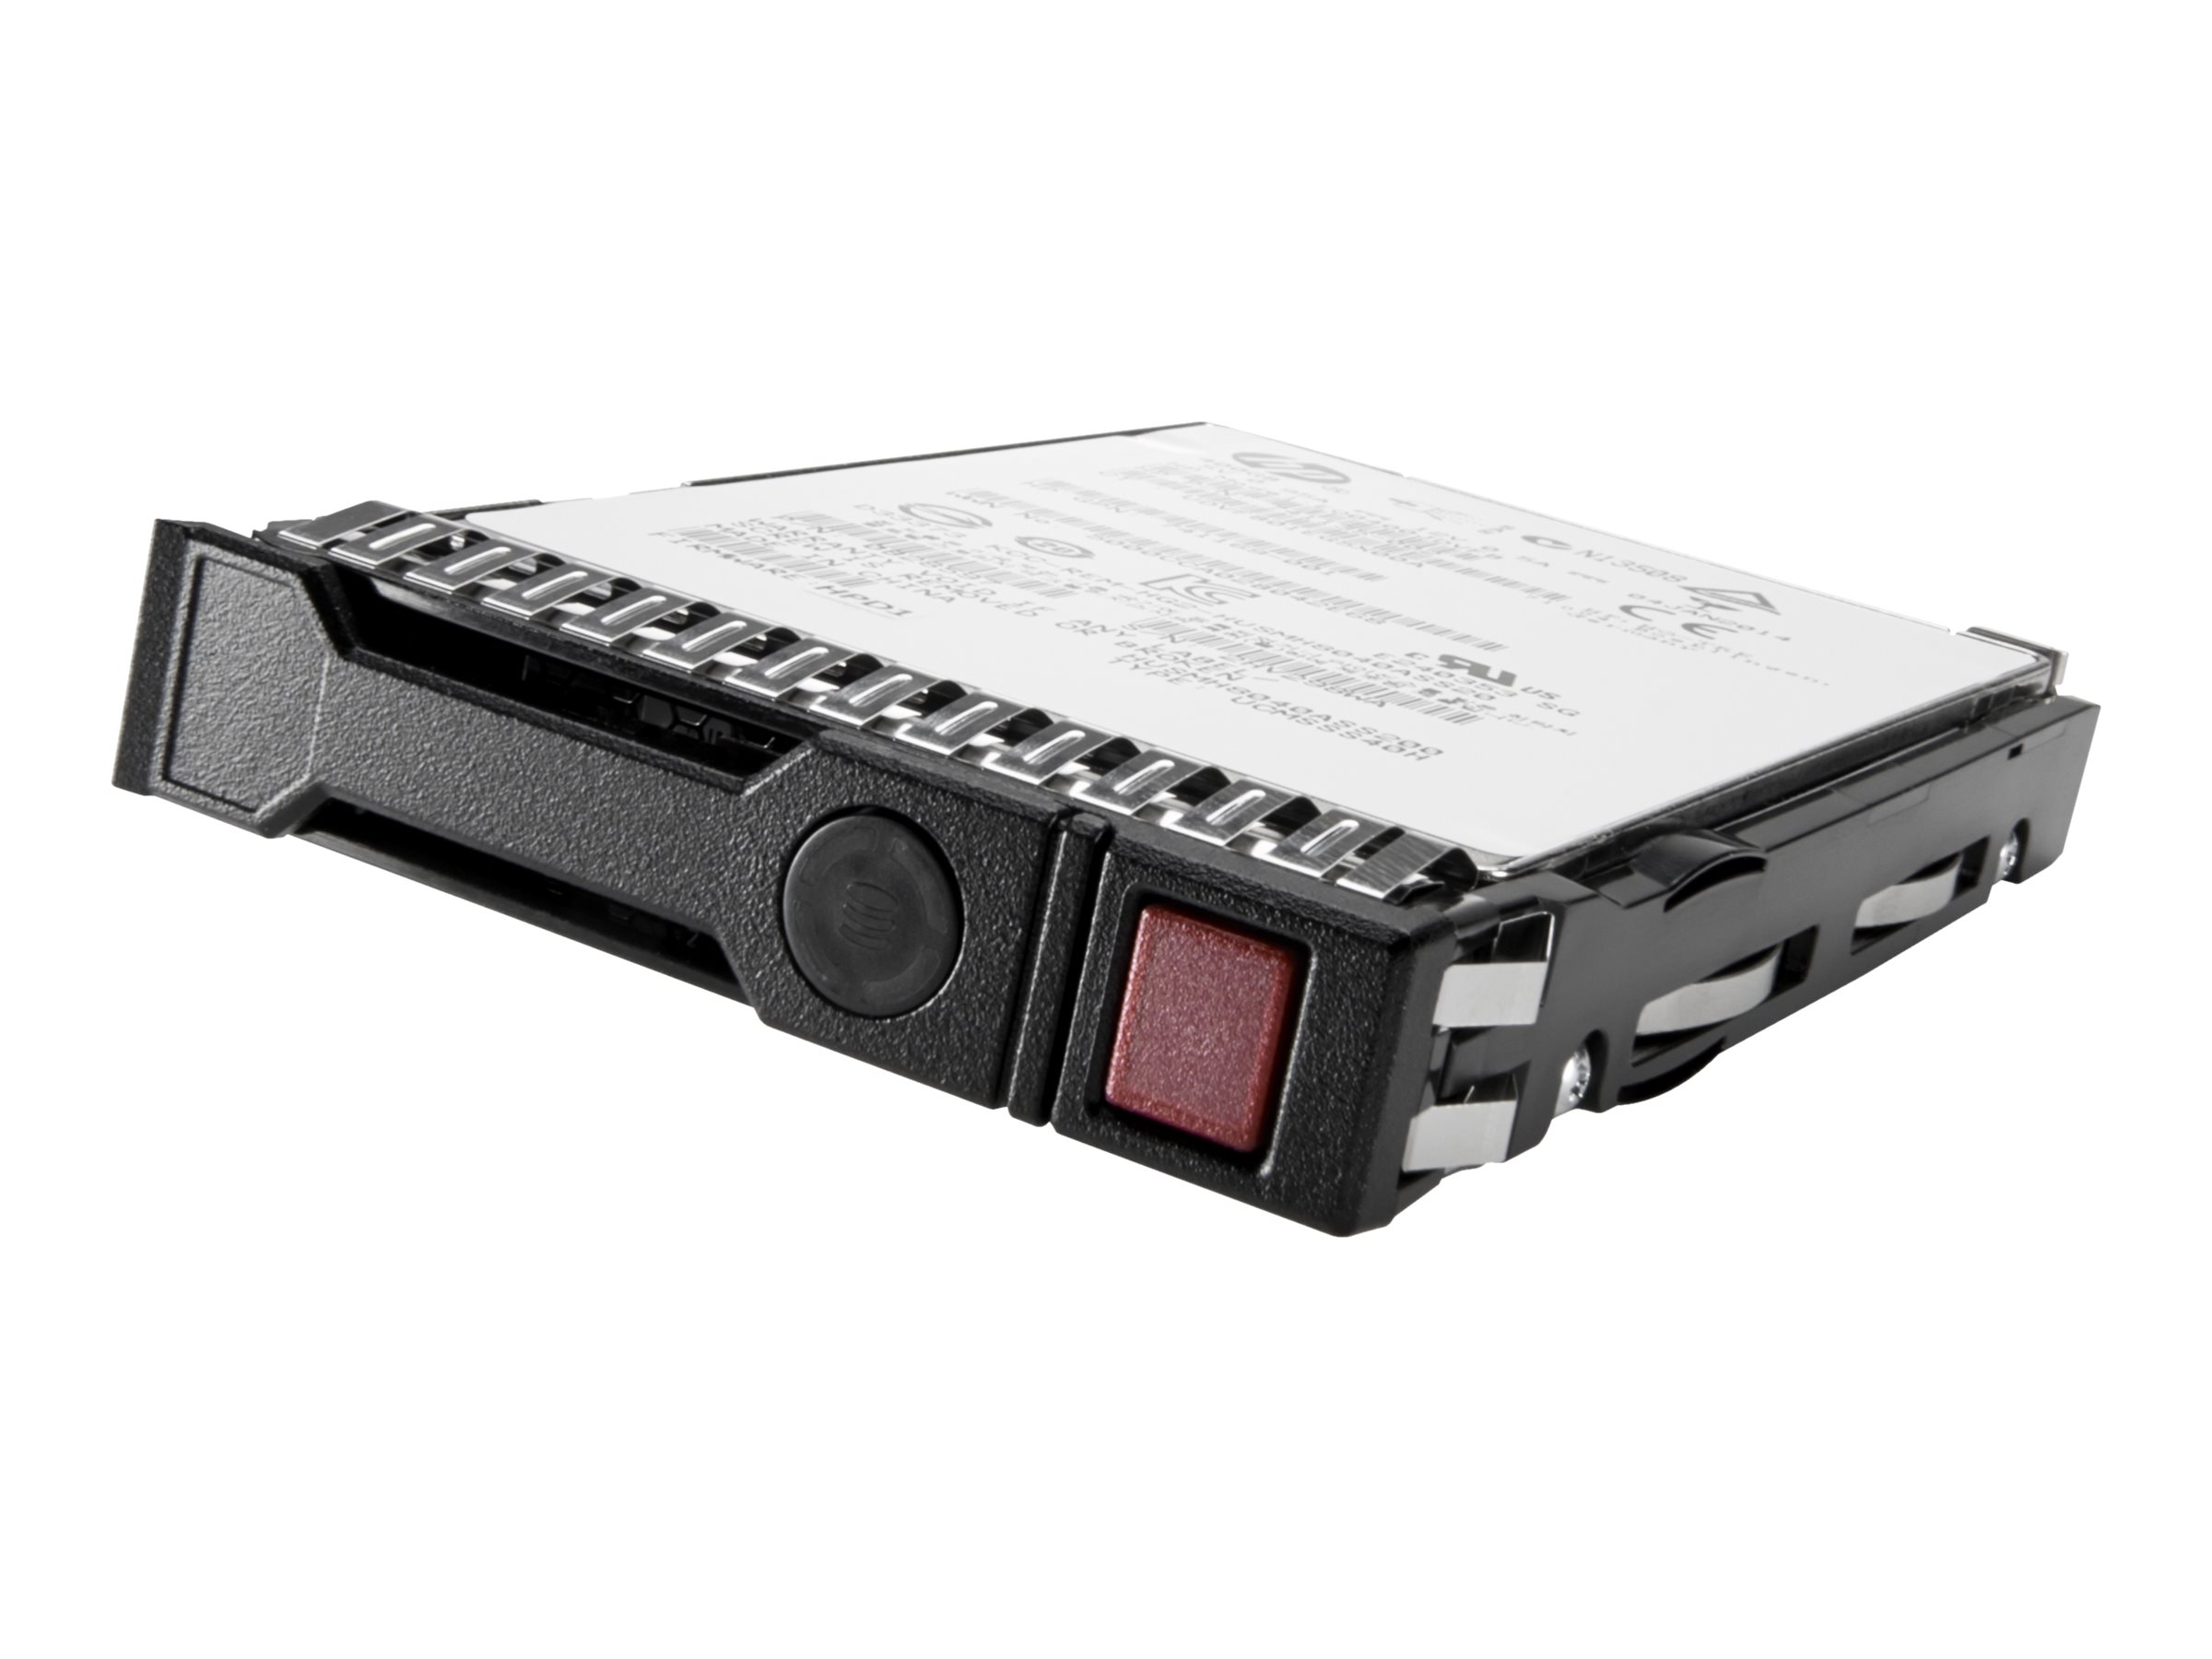 HPE - SSD - Mixed Use - 1.6 To - échangeable à chaud - 2.5" SFF - SAS 12Gb/s - Multi Vendor - avec HPE Smart Carrier - P49048-B21 - Disques SSD